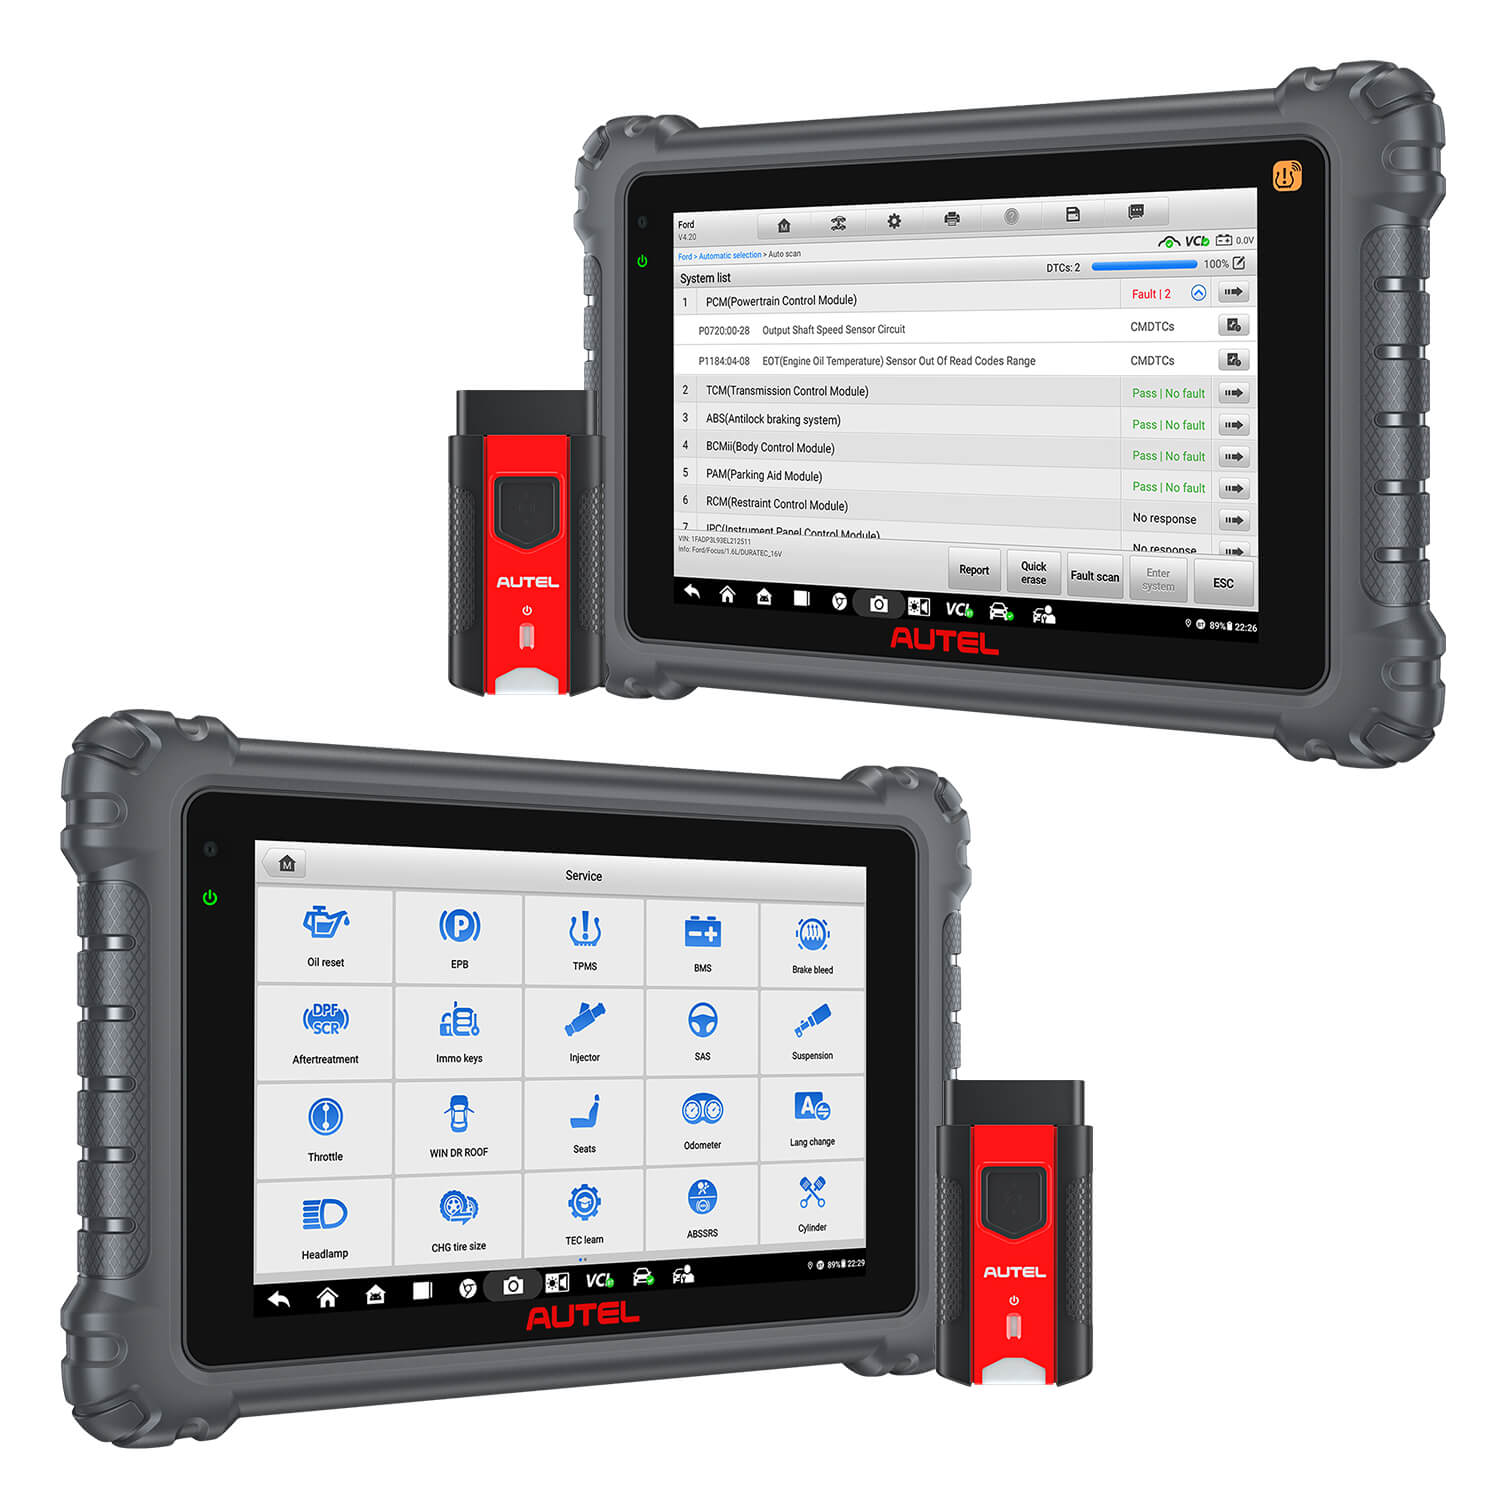 Buy: Autel MaxiSYS MS906 Pro Diagnostic Scan Tool - Buy Now